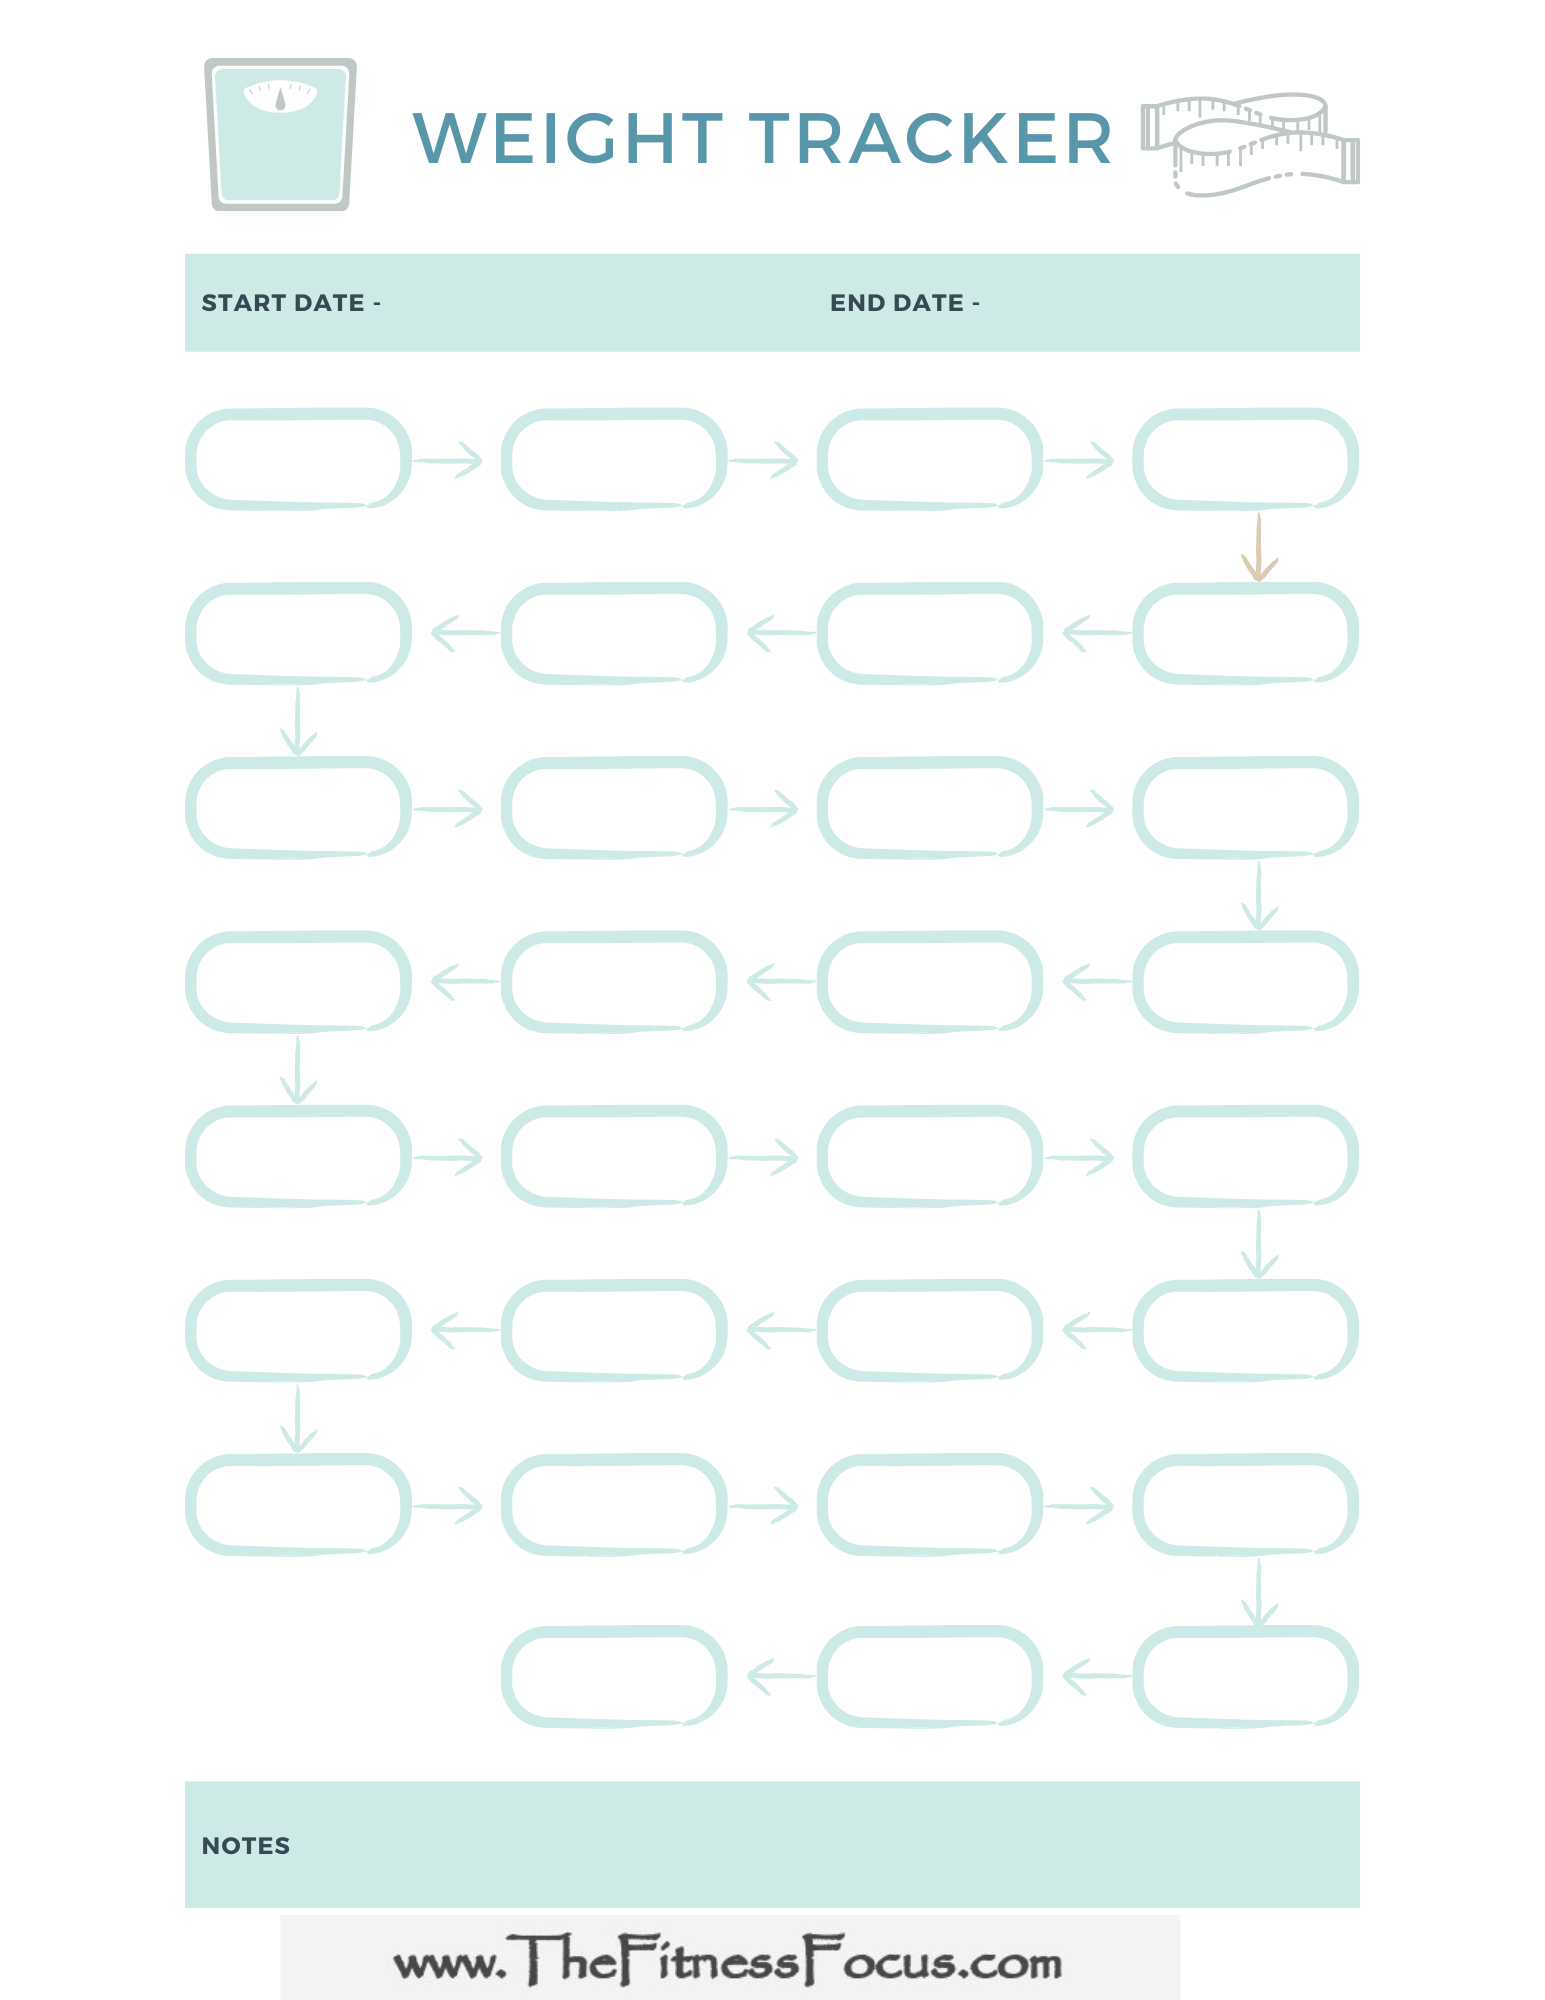 Free Printable Simple 70 Lbs Visual Weight Loss Tracker · InkPx